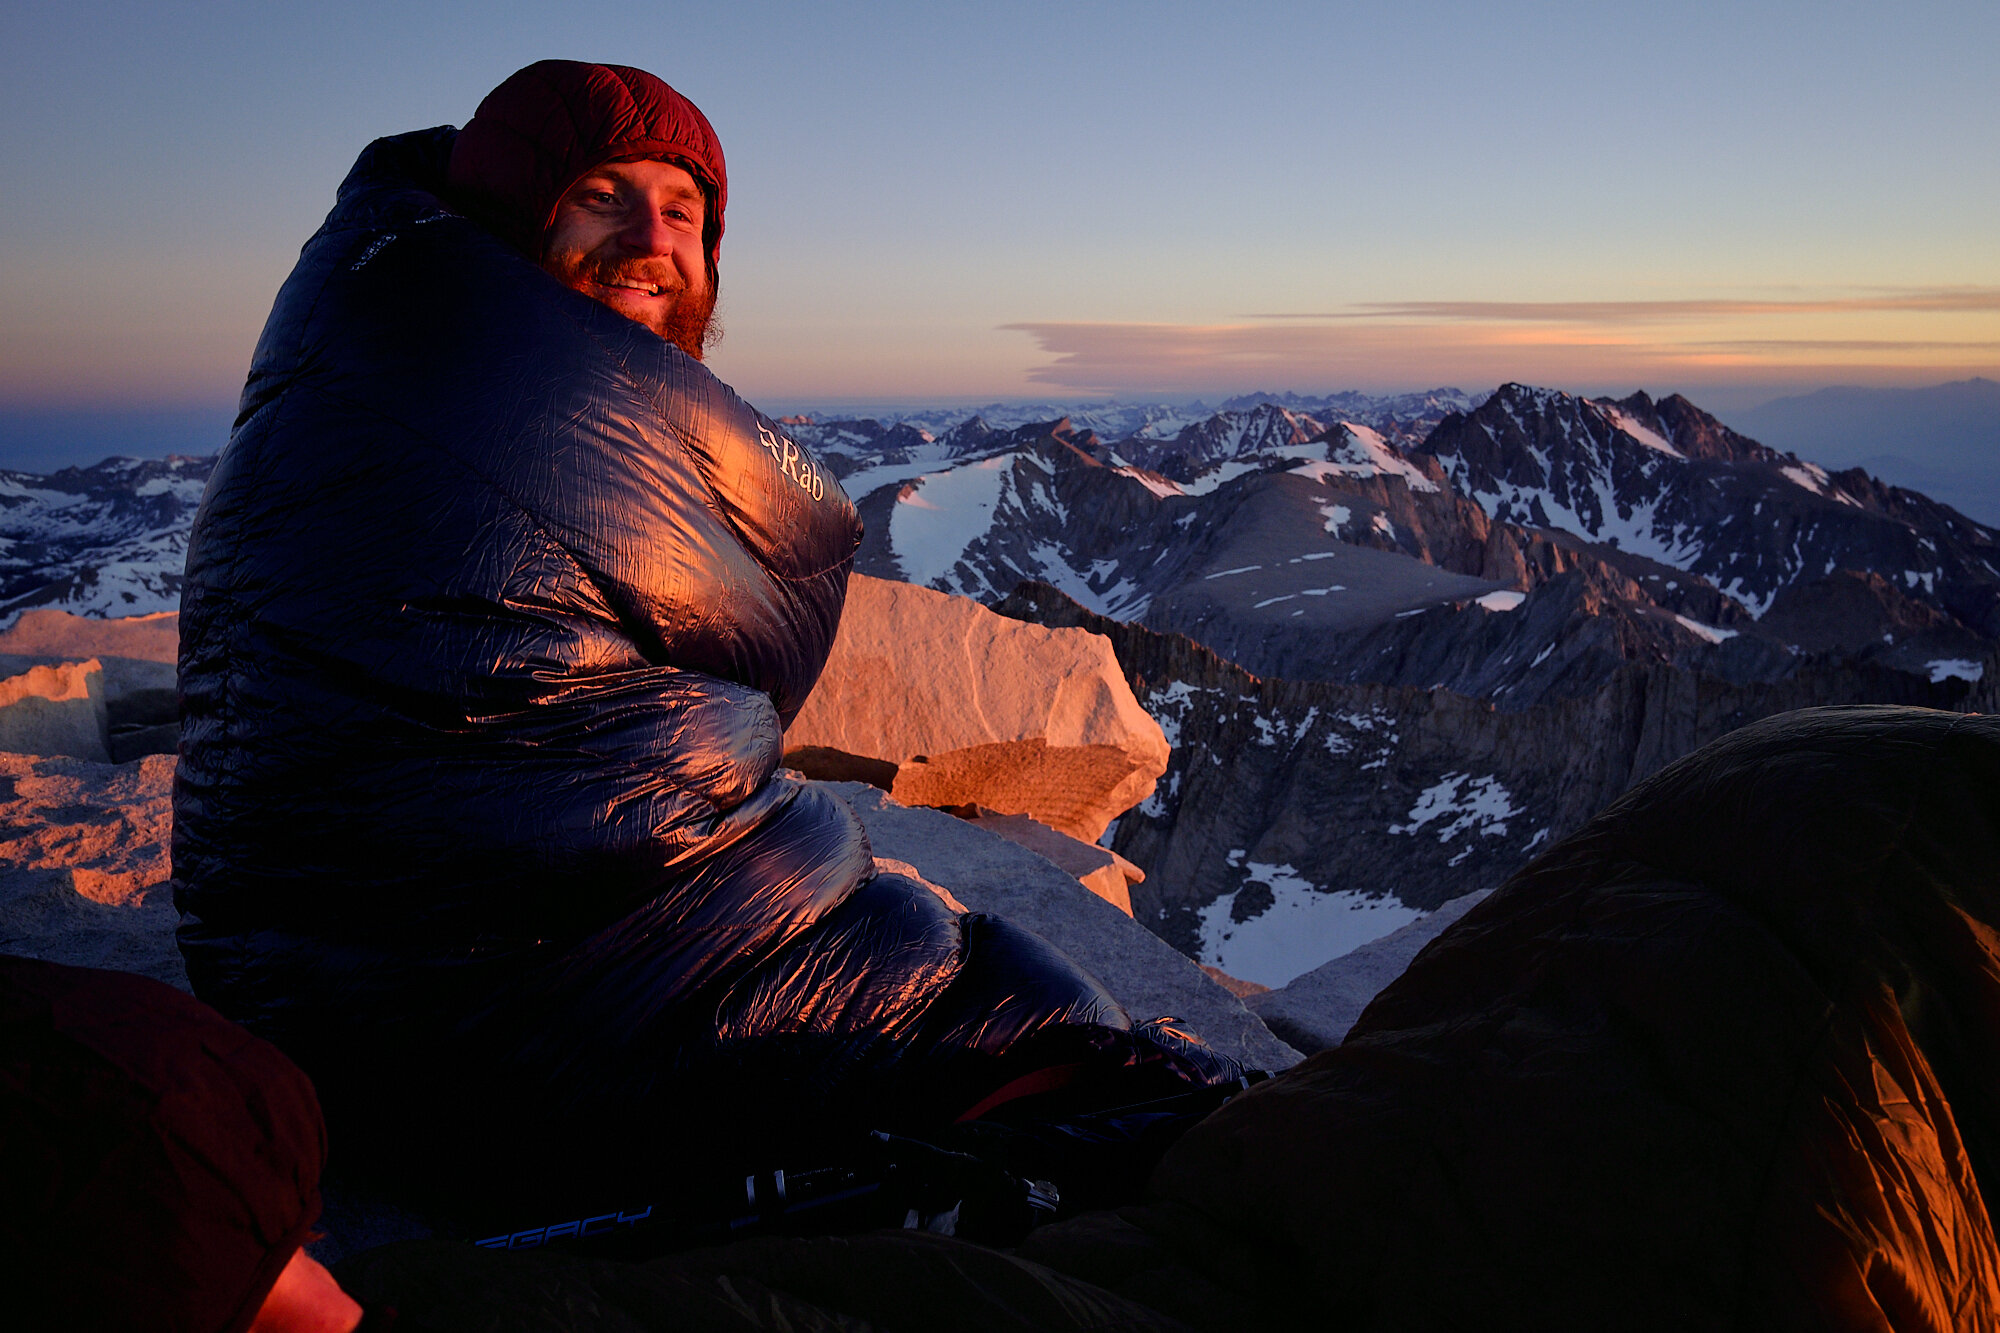  Lebowski enjoys the warmth of the first rays of sun atop Mt. Whitney. | 6/26/19 Mile 767.0, 14,504' 